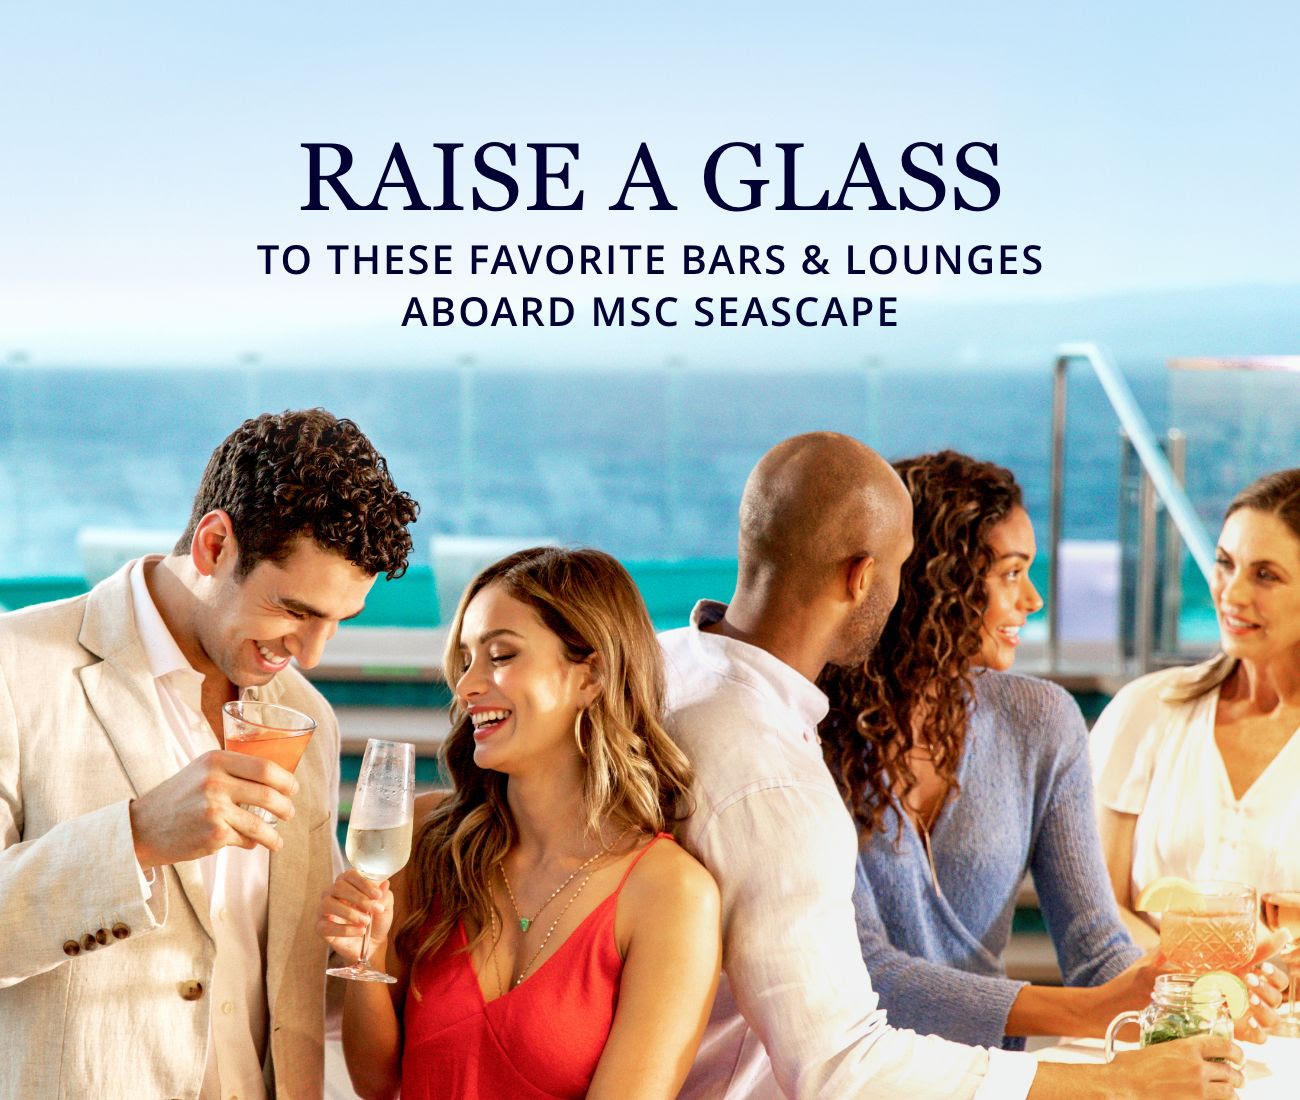 RAISE A GLASS To These Favorite Bars & Lounges Aboard MSC Seascape